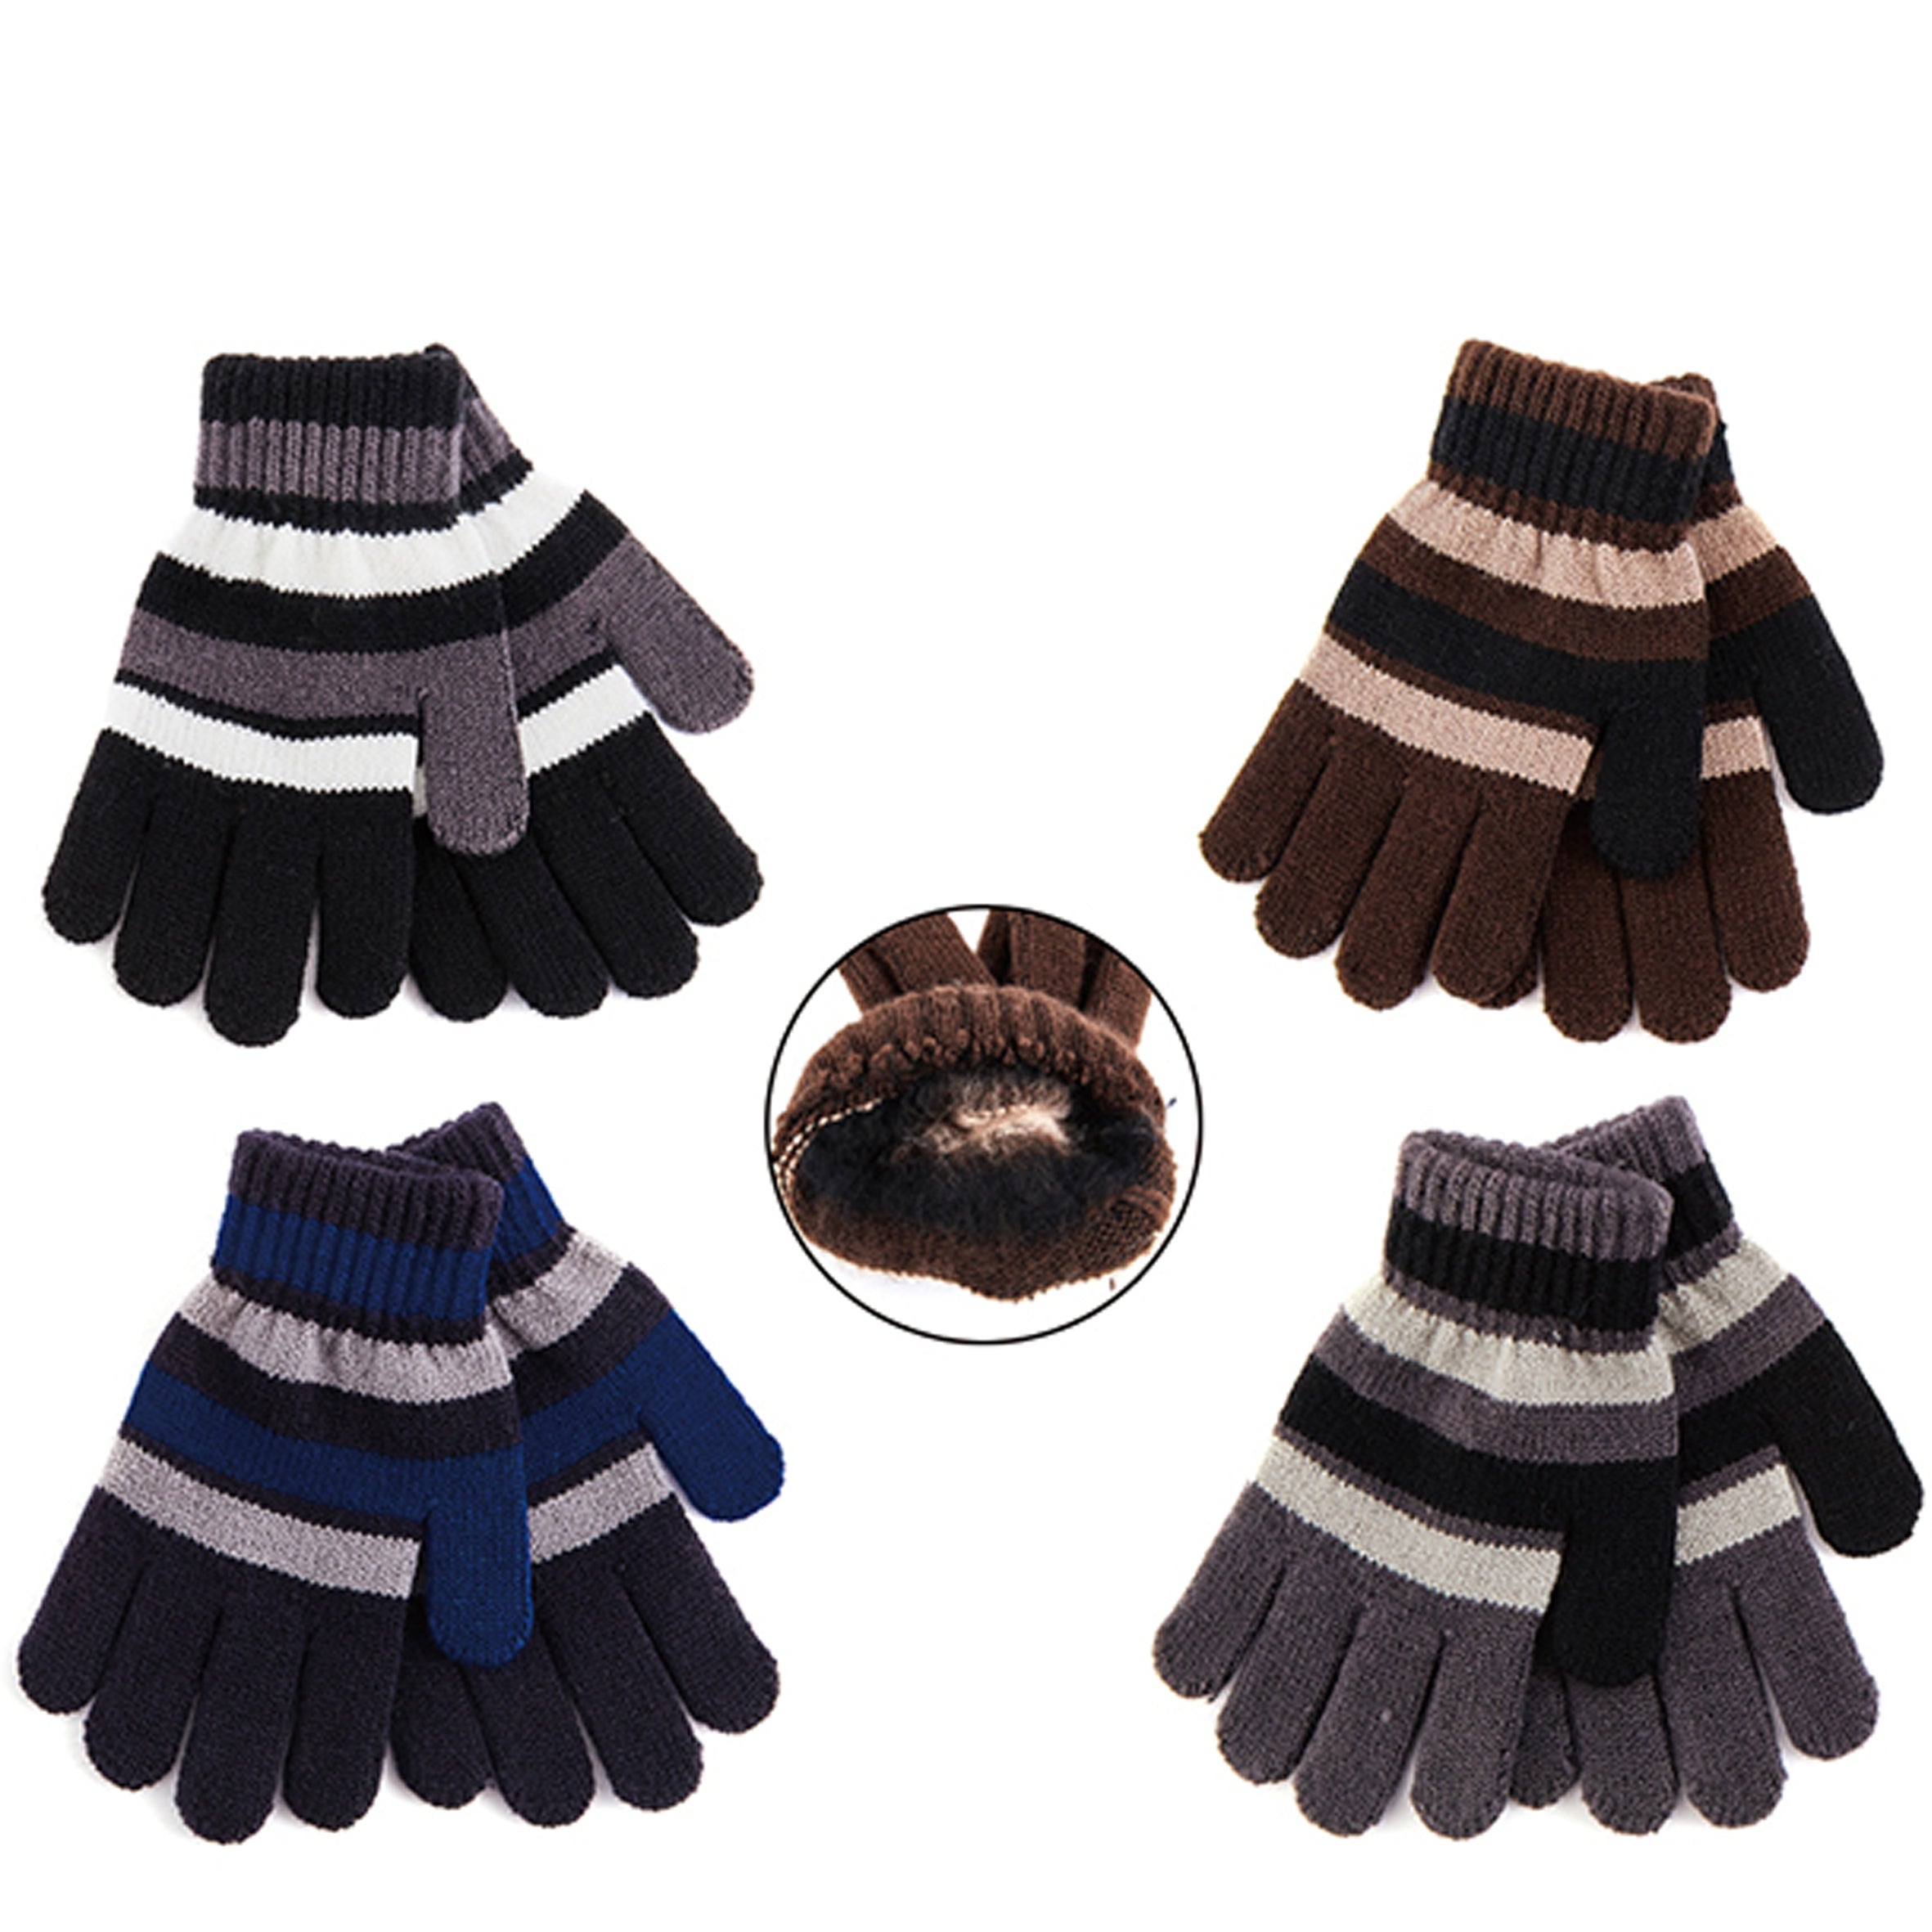 Wholesale CLOTHING Accessories Striped Knitted Kids Gloves NH265